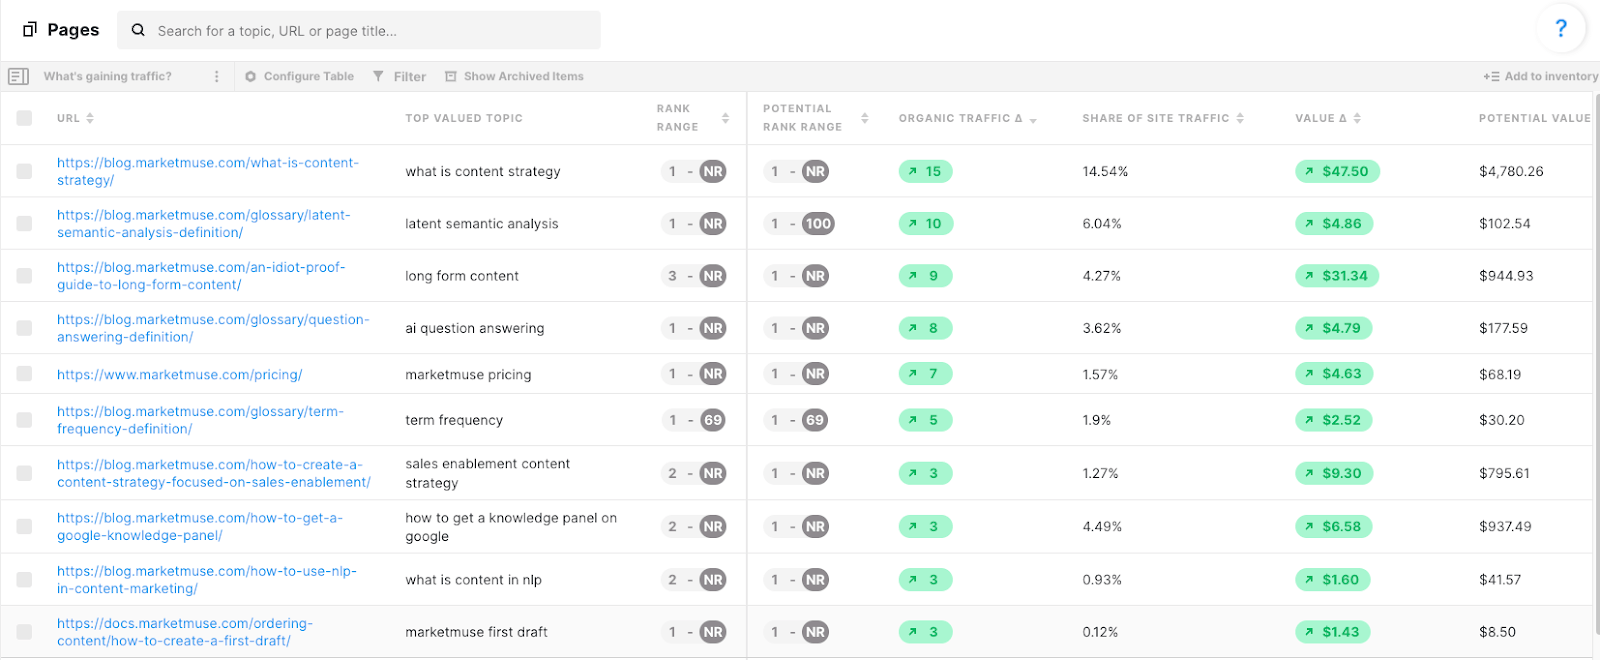 MarketMuse Pages Inventory showing a list of pages along with the following data: URL, top valued topic, rank range, potential rank range, organic traffic delta, share of site traffic, value delta, and potential value.